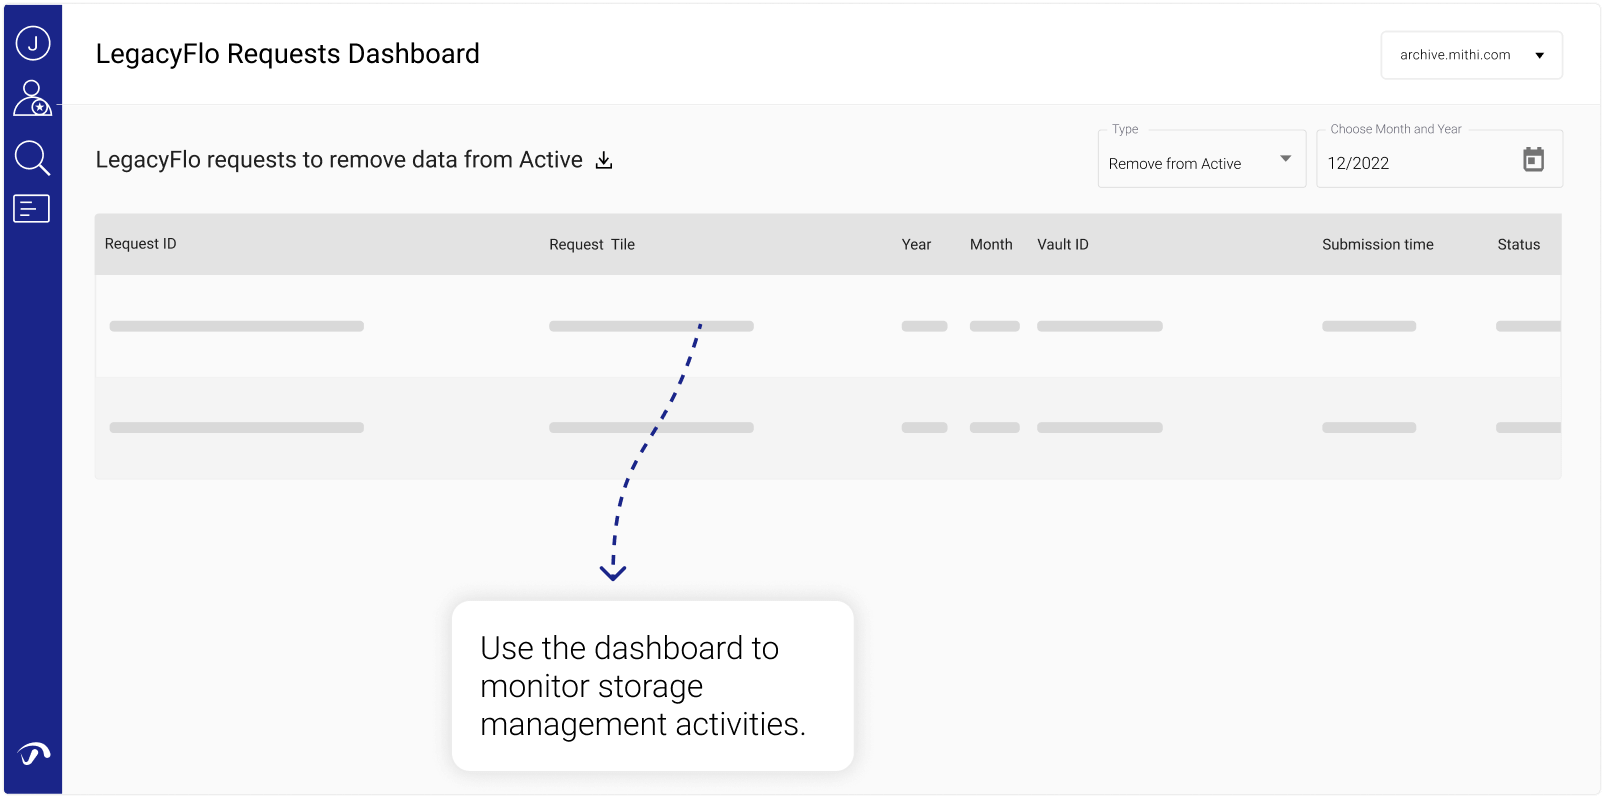 Use the dashboard to monitor automation.